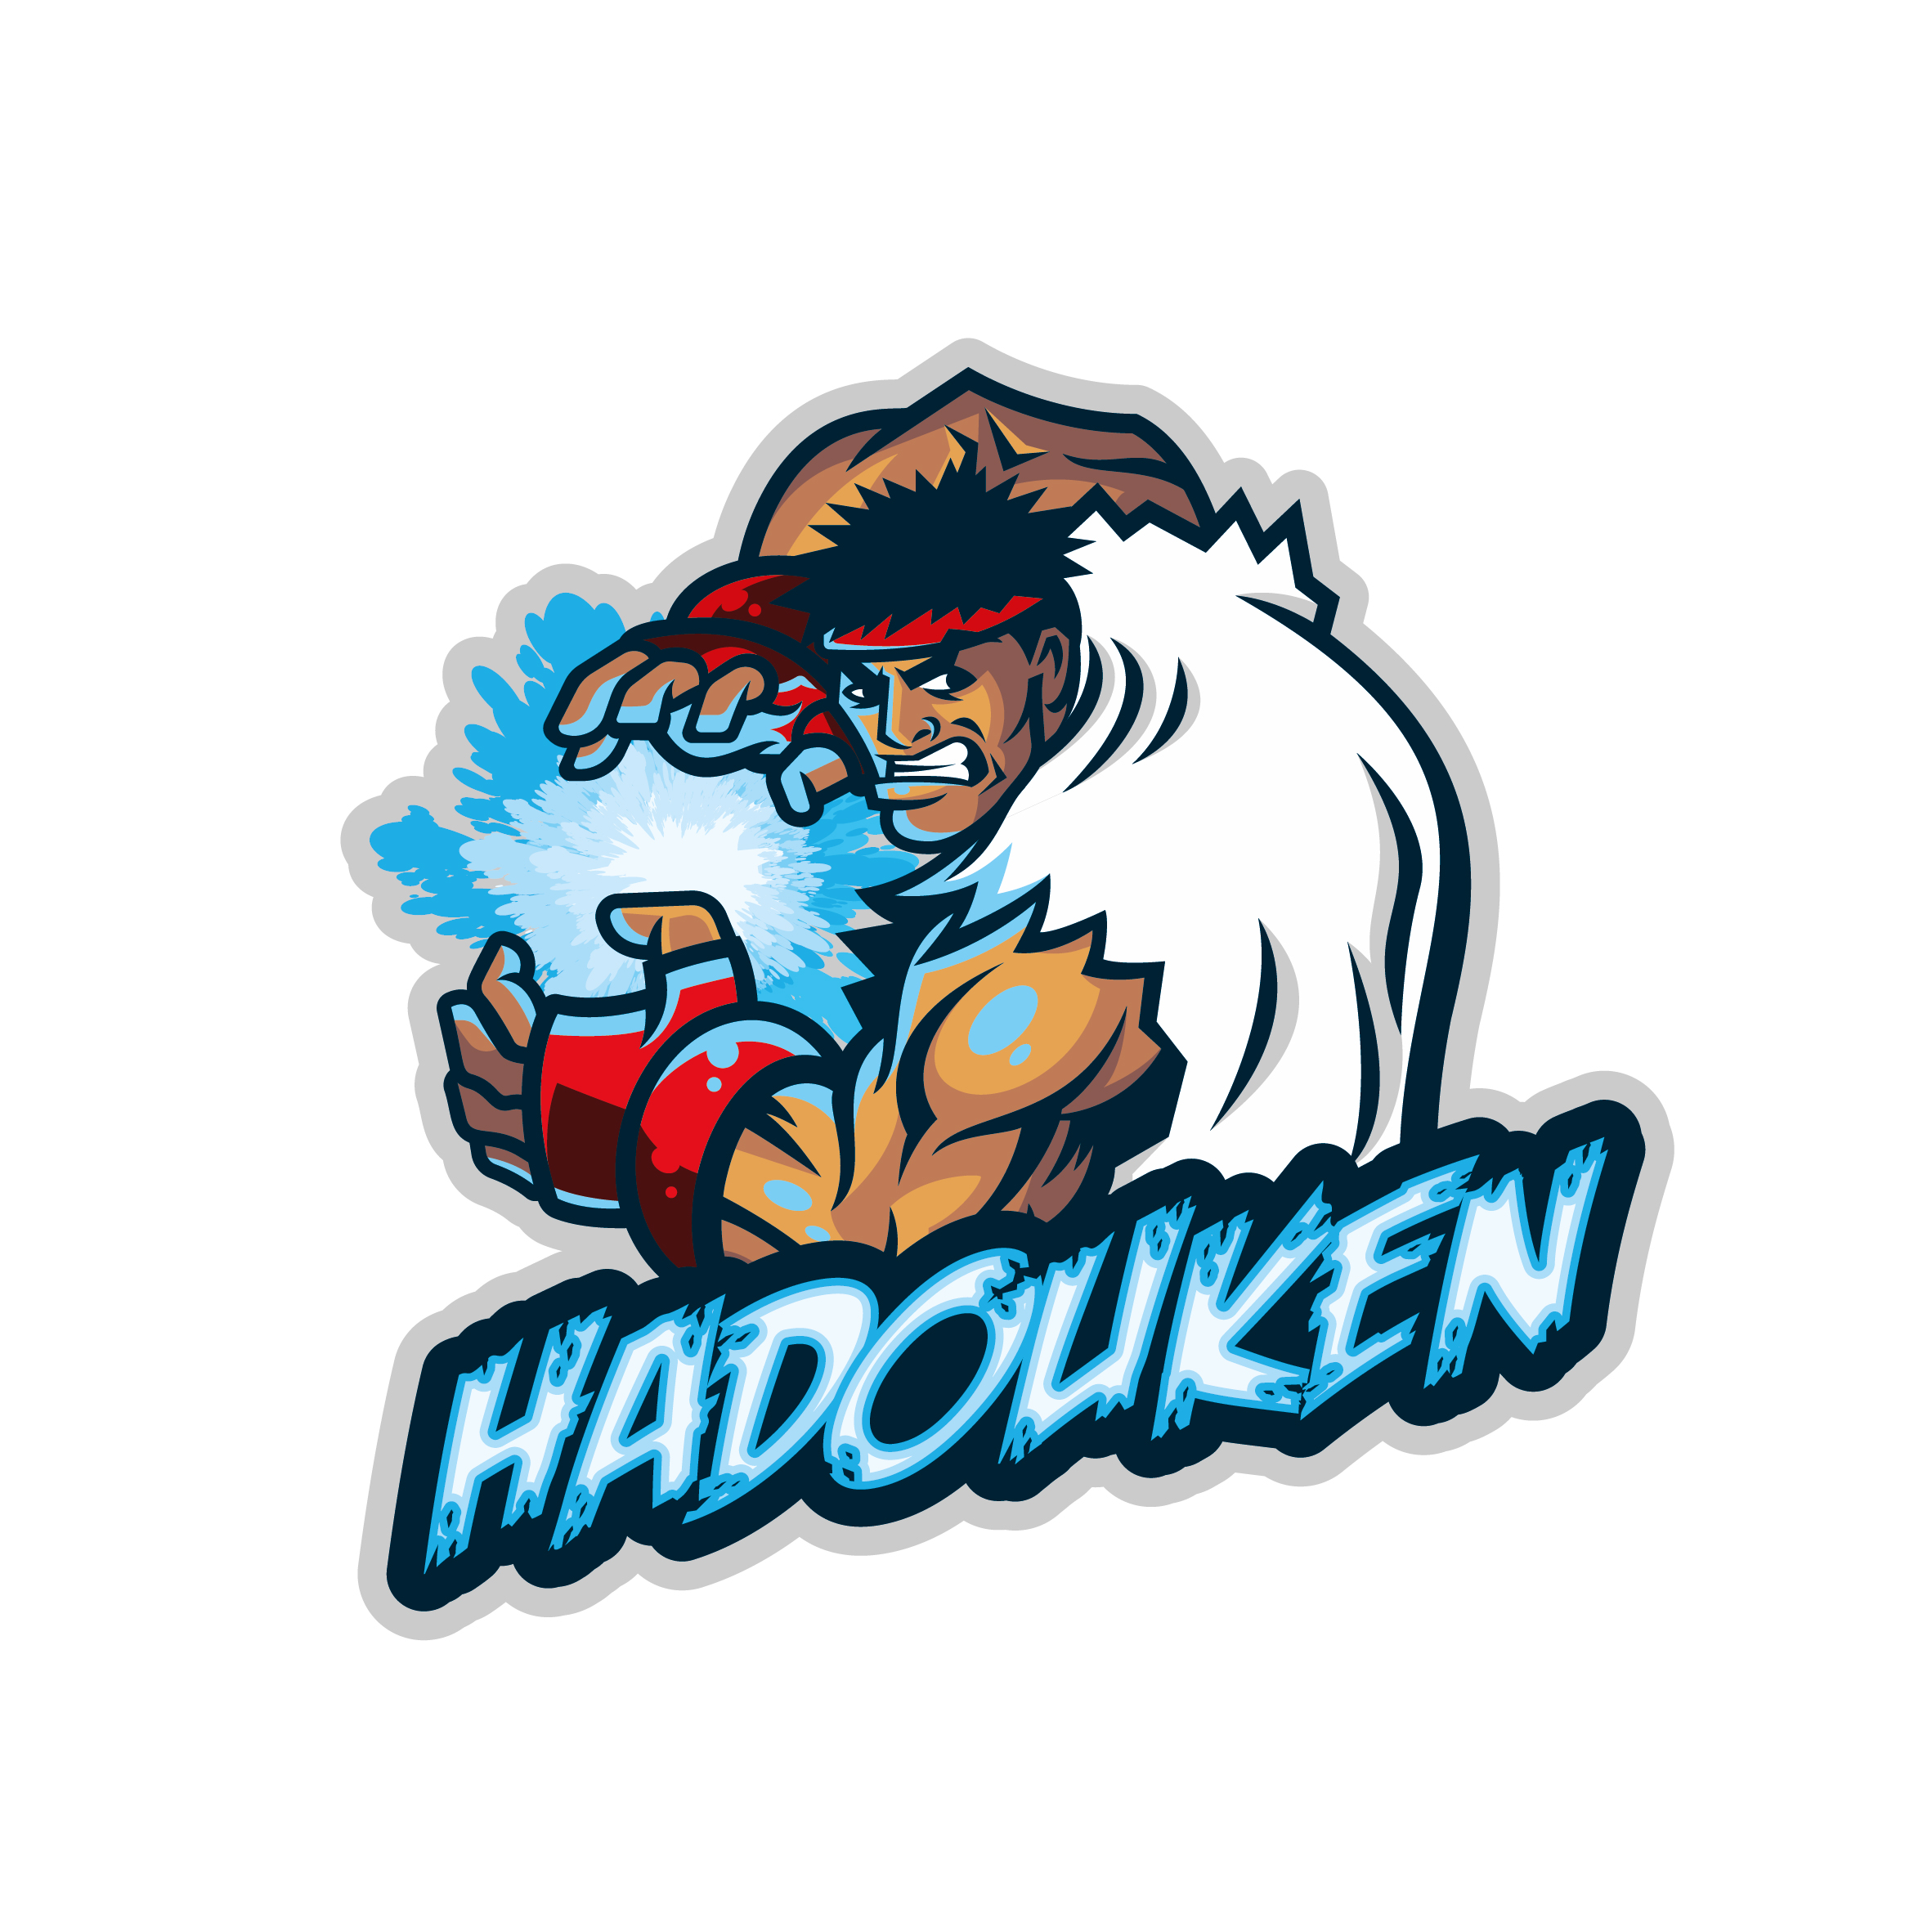 Hadouken logo design by logo designer Tortoiseshell Black for your inspiration and for the worlds largest logo competition